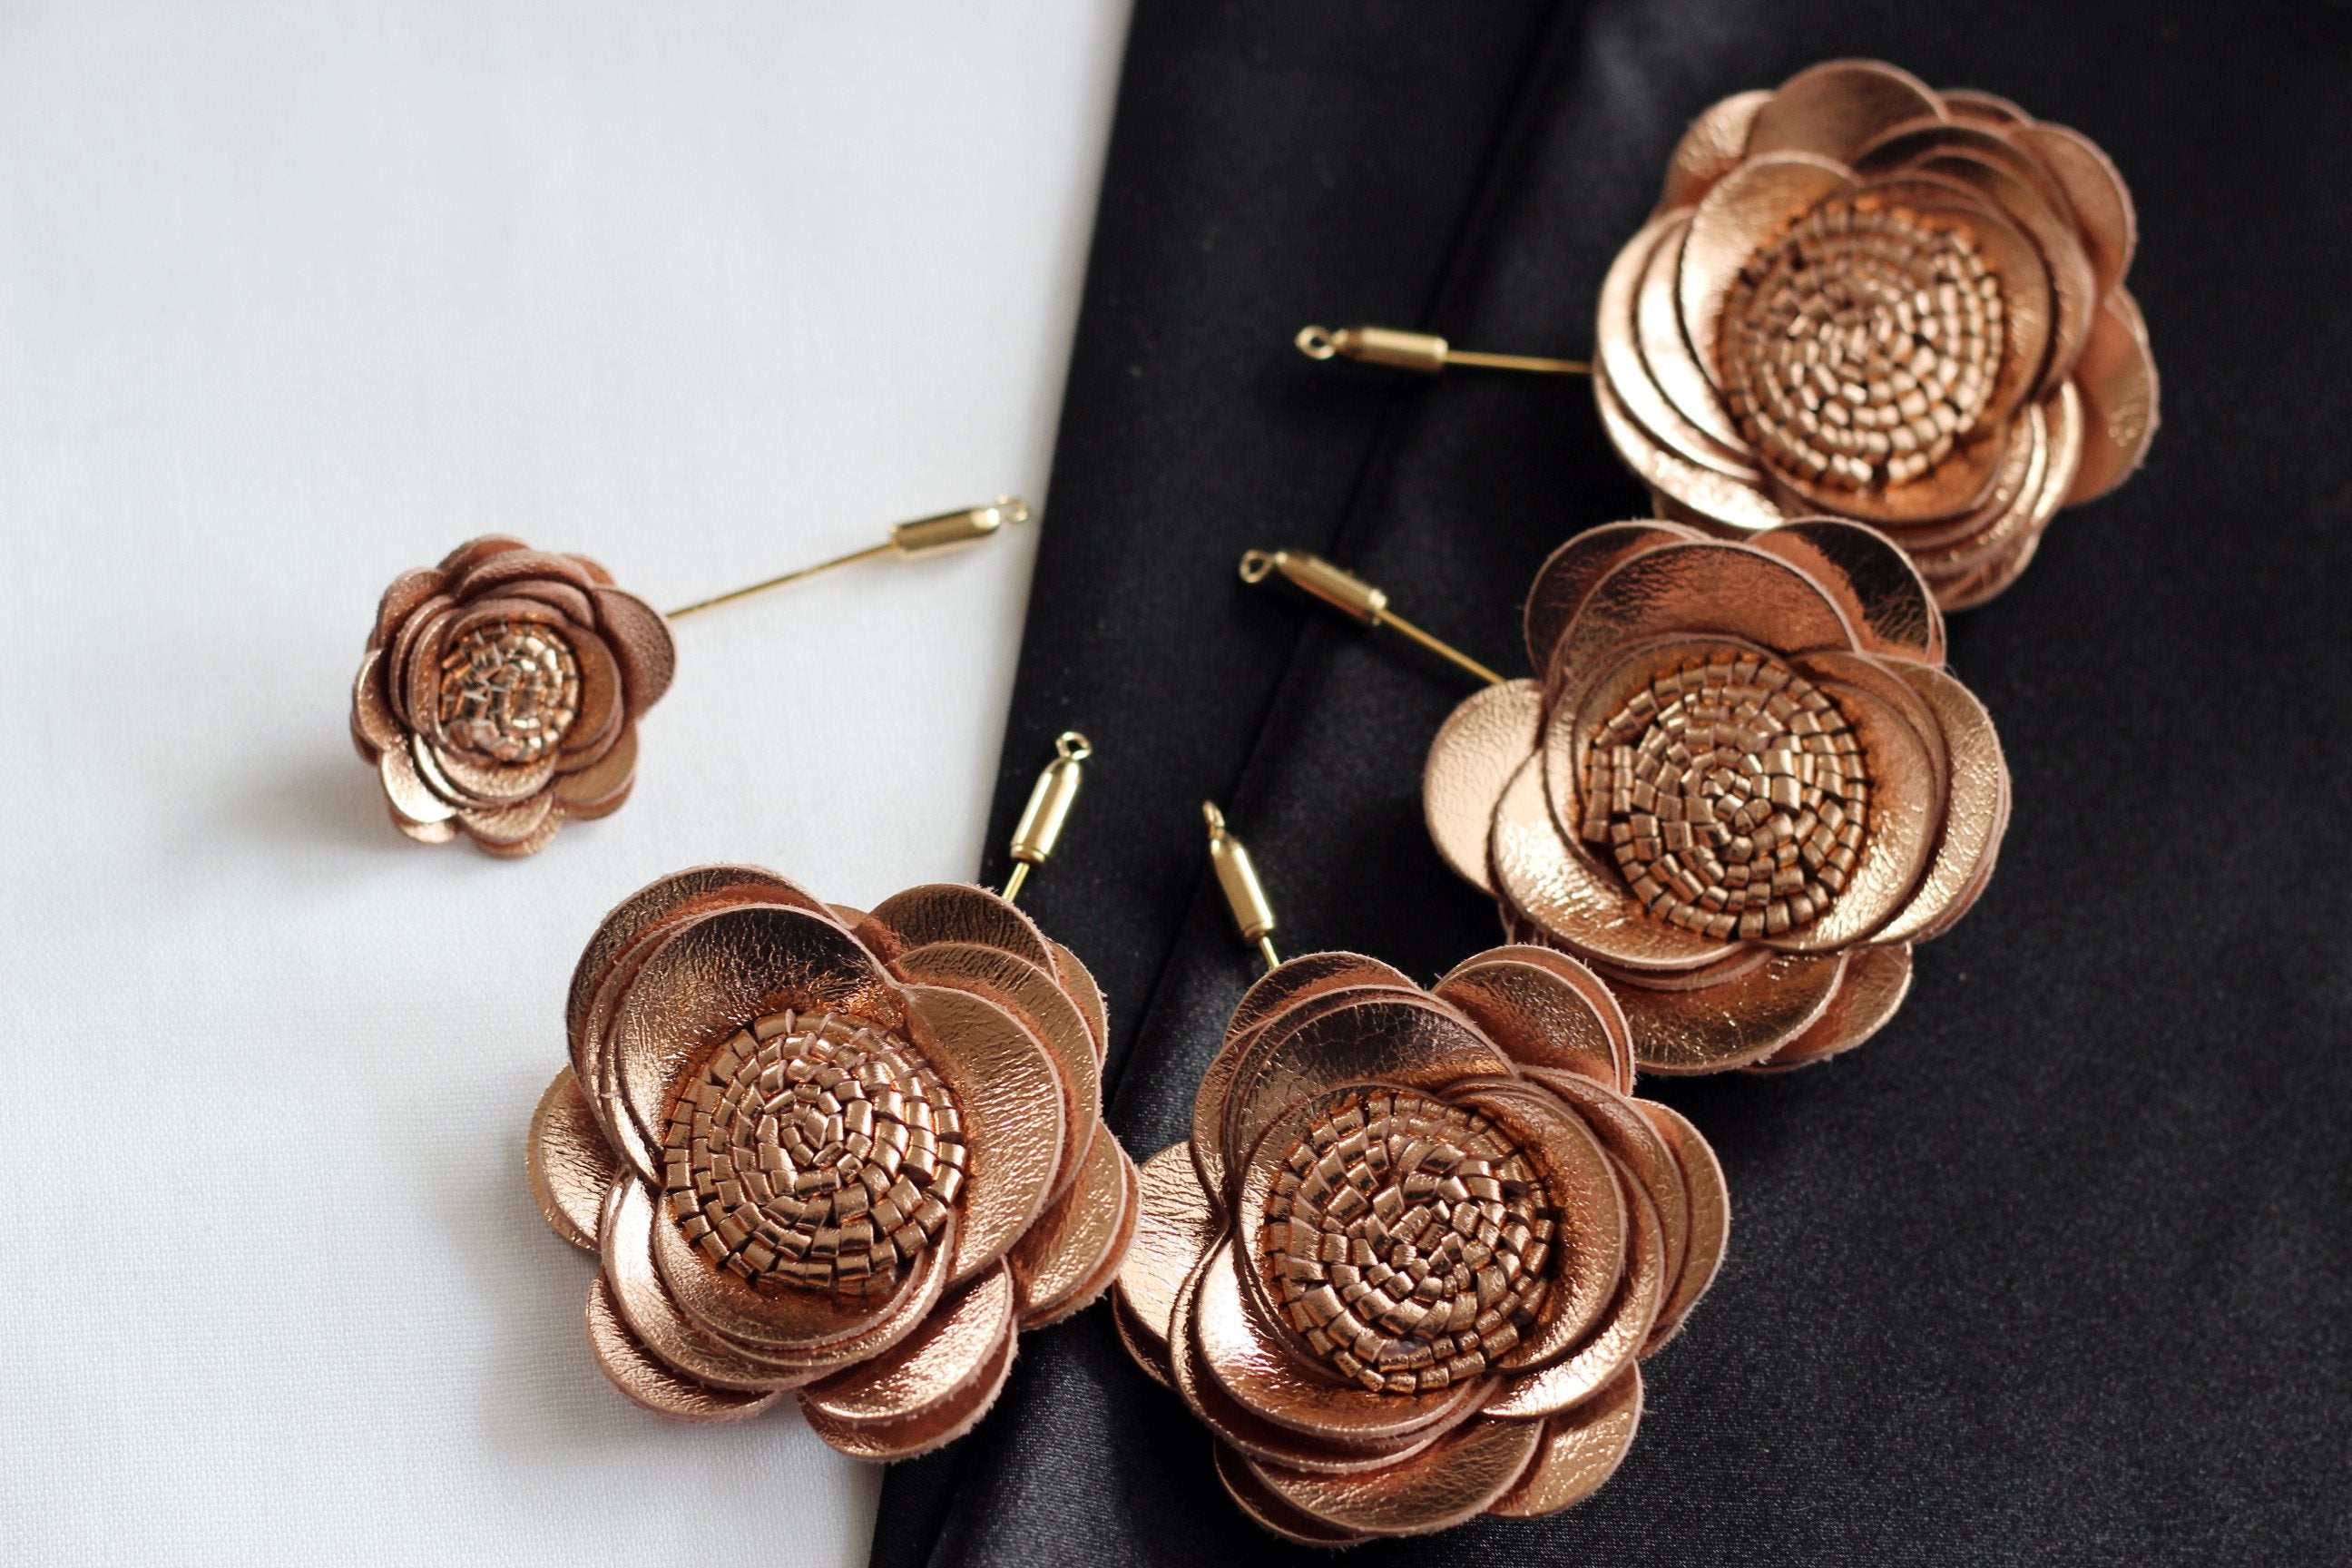 Rose gold lapel flower pin, boutonniere, rose gold genuine leather necktie  - Nevestica shop